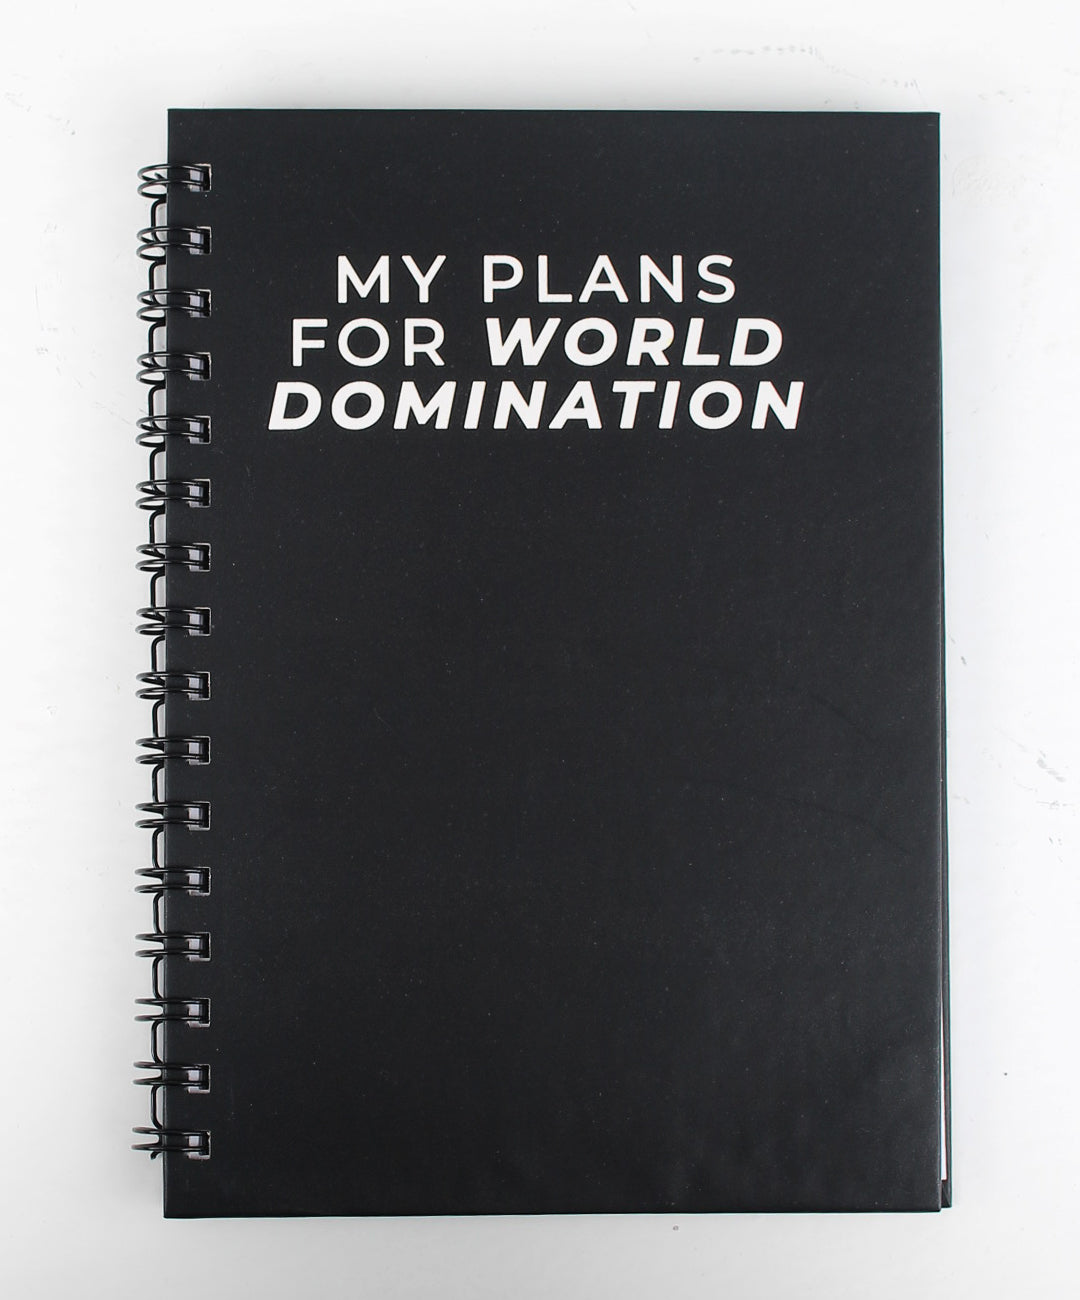 My plans for world domination